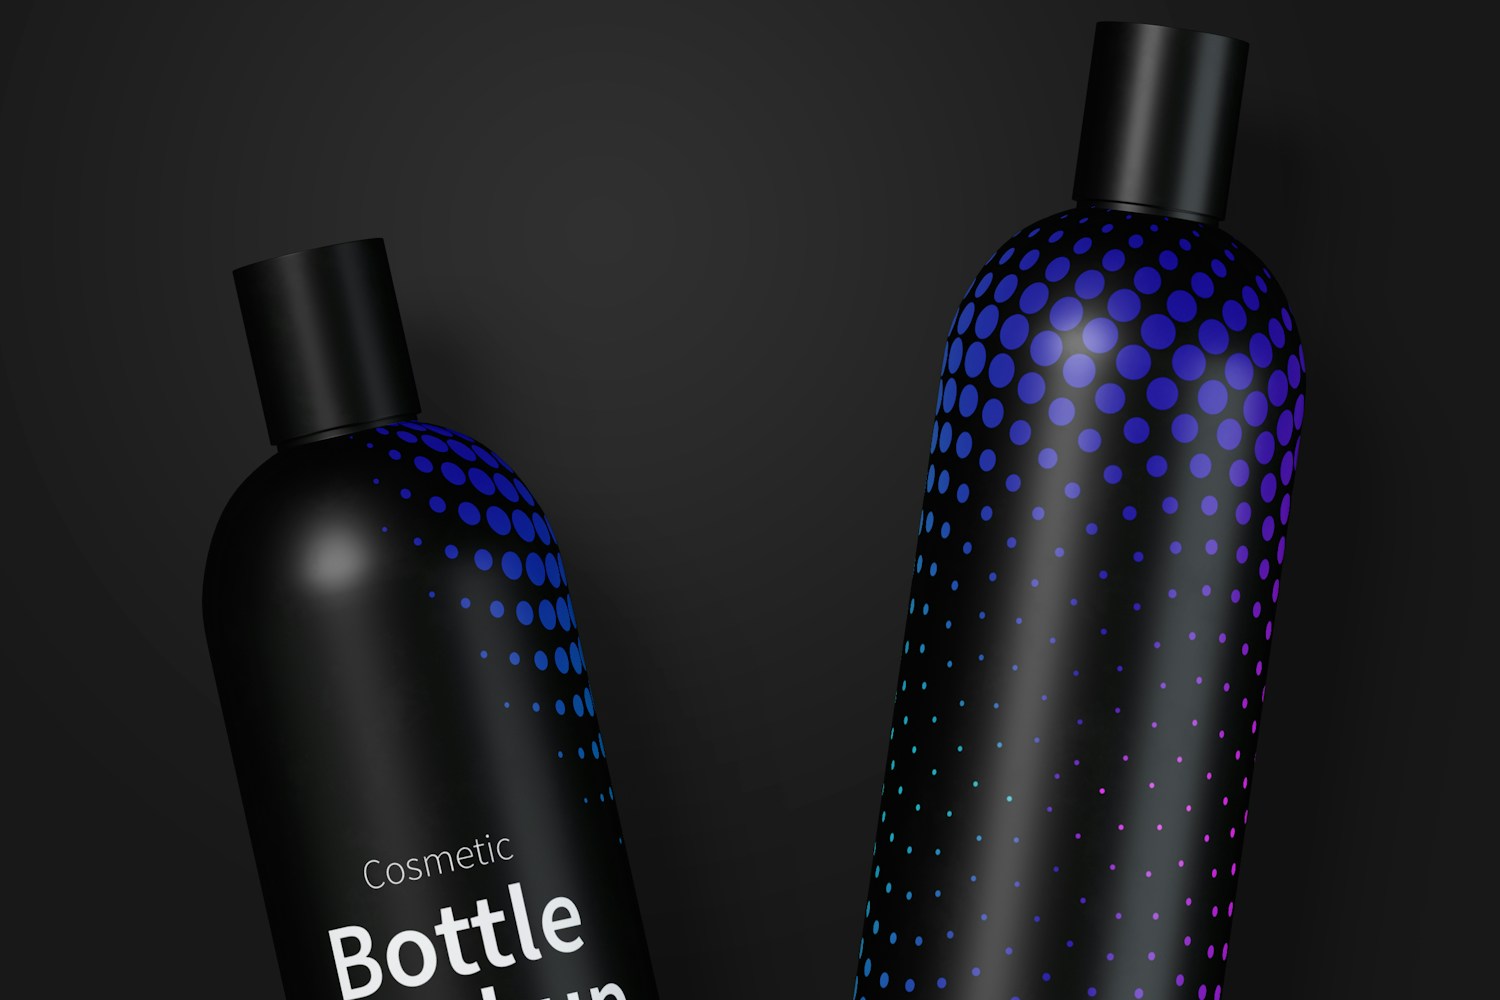 8 oz / 240 ml Cosmo Round Shape Cosmetic Bottles Mockup with Disc Cap in Front View